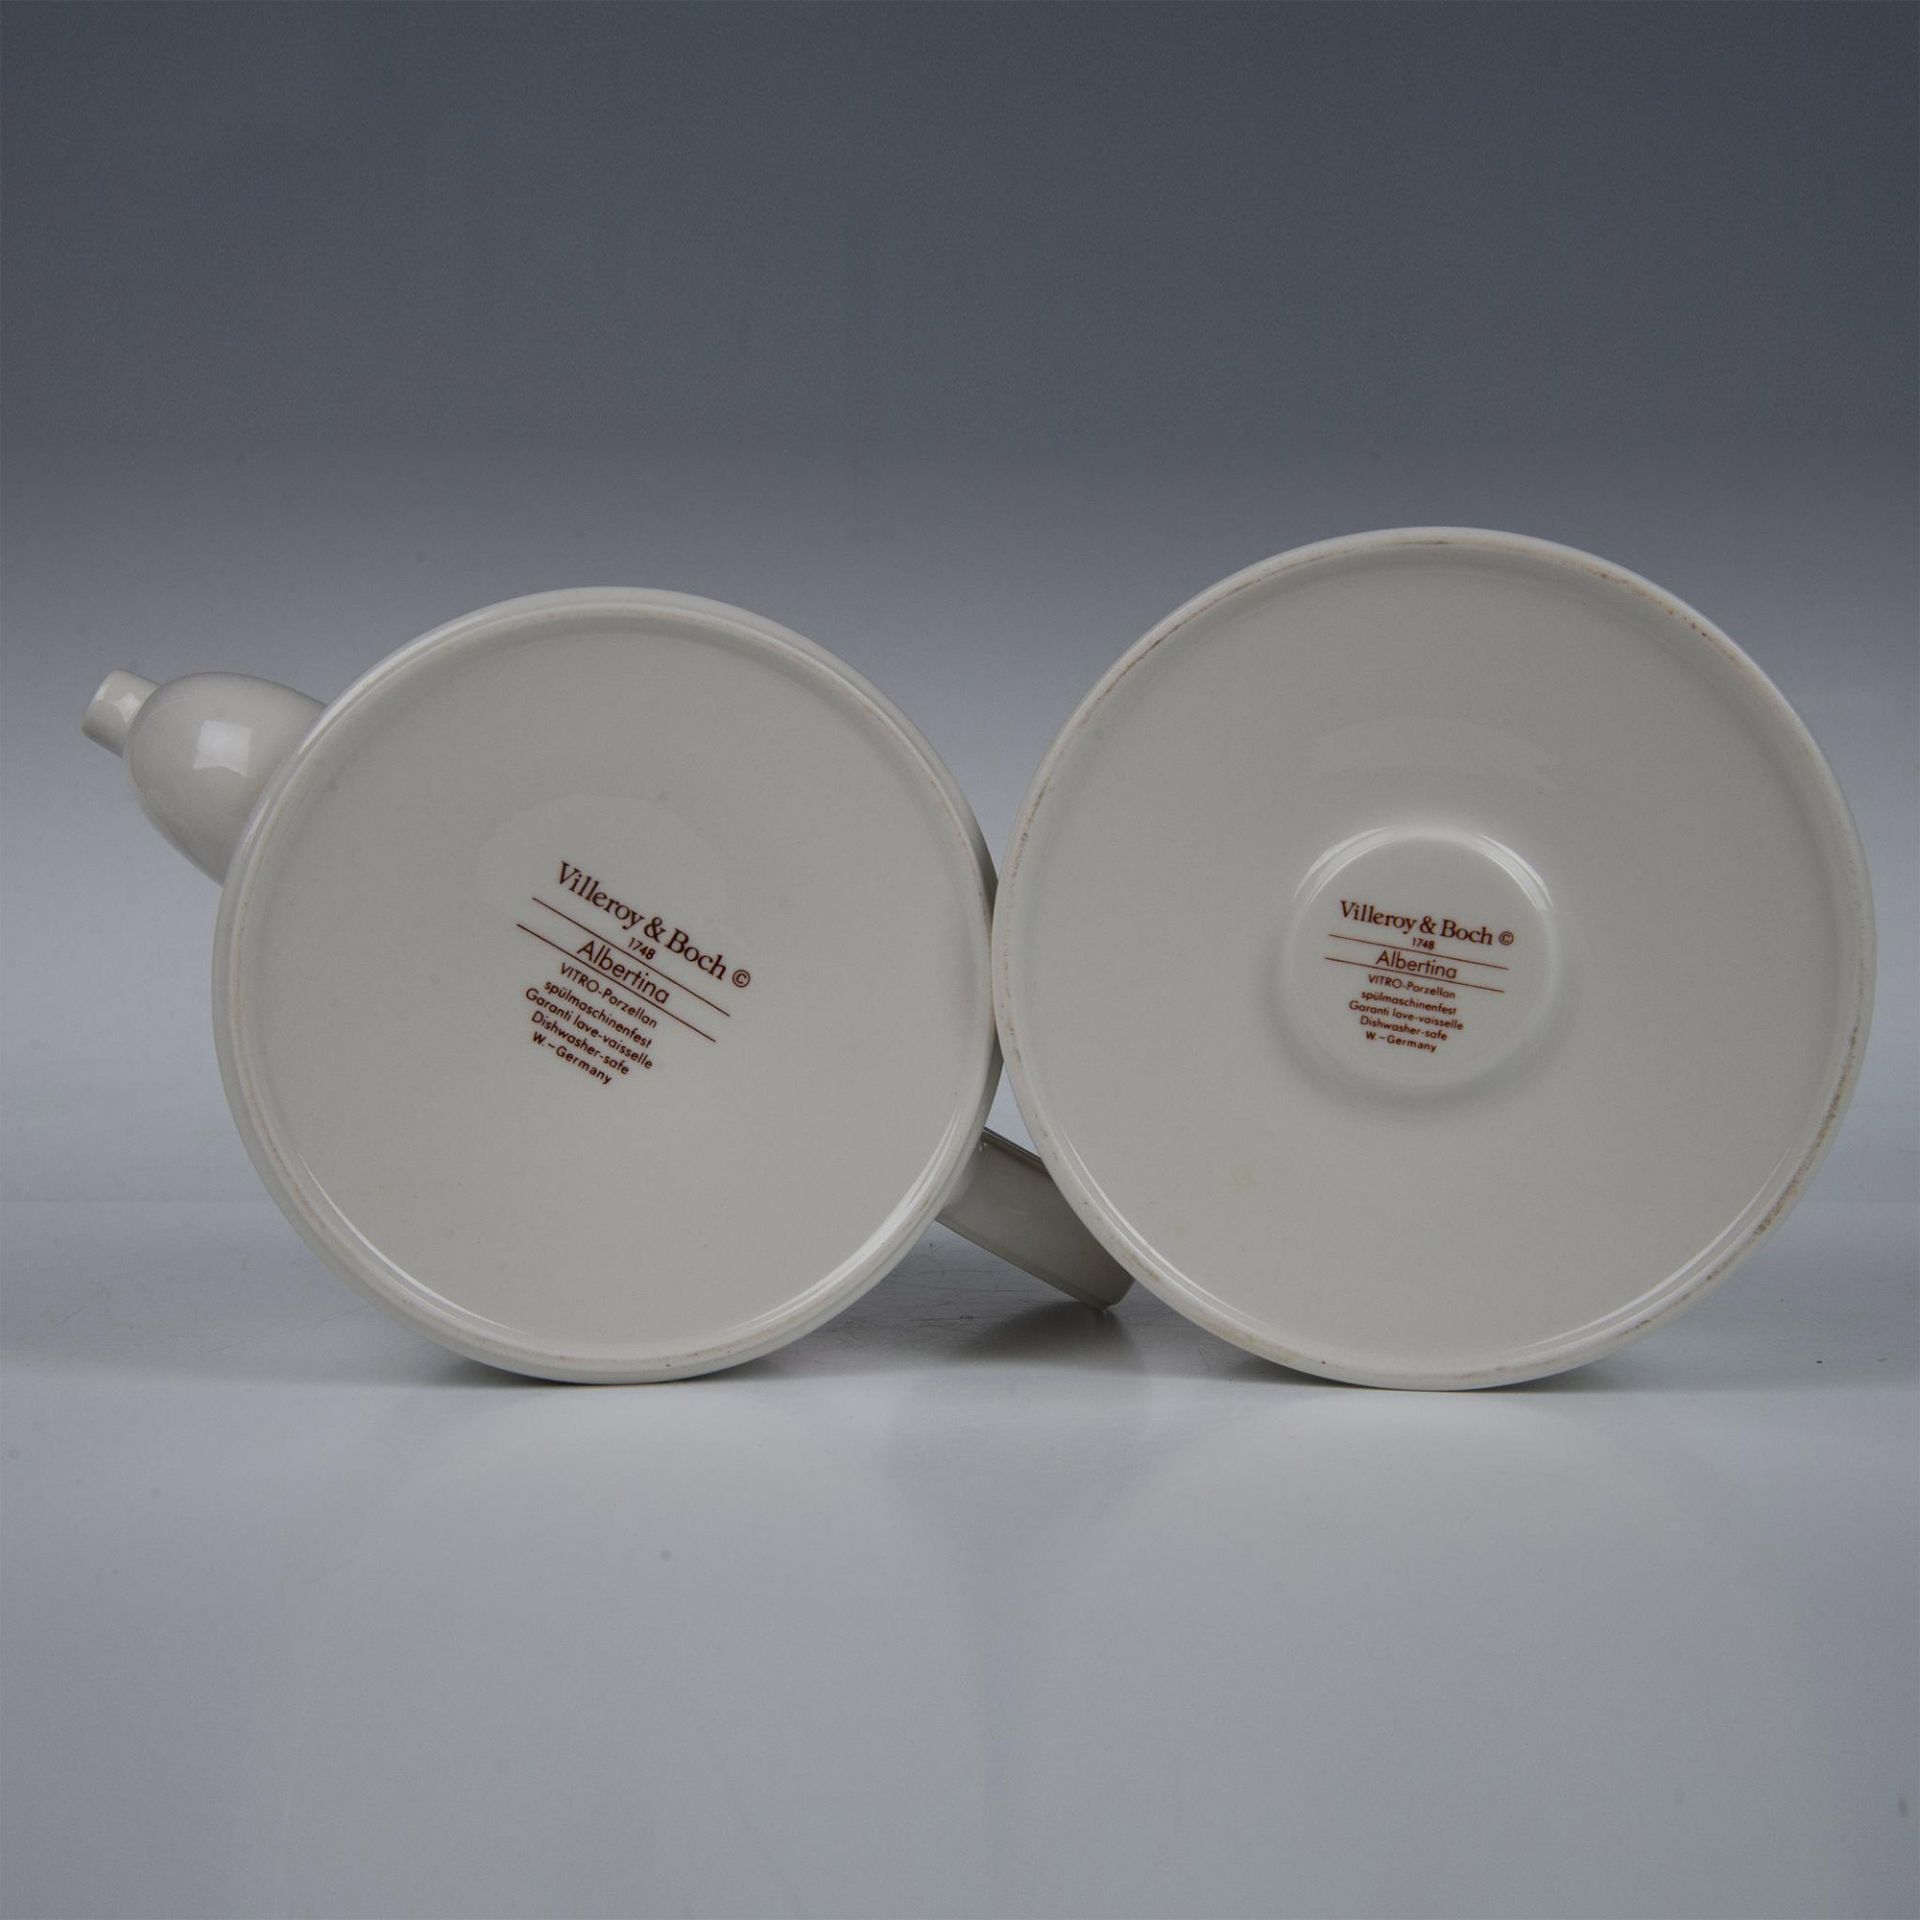 7pc Villeroy and Boch Tableware Grouping, Albertina Pattern - Image 7 of 9